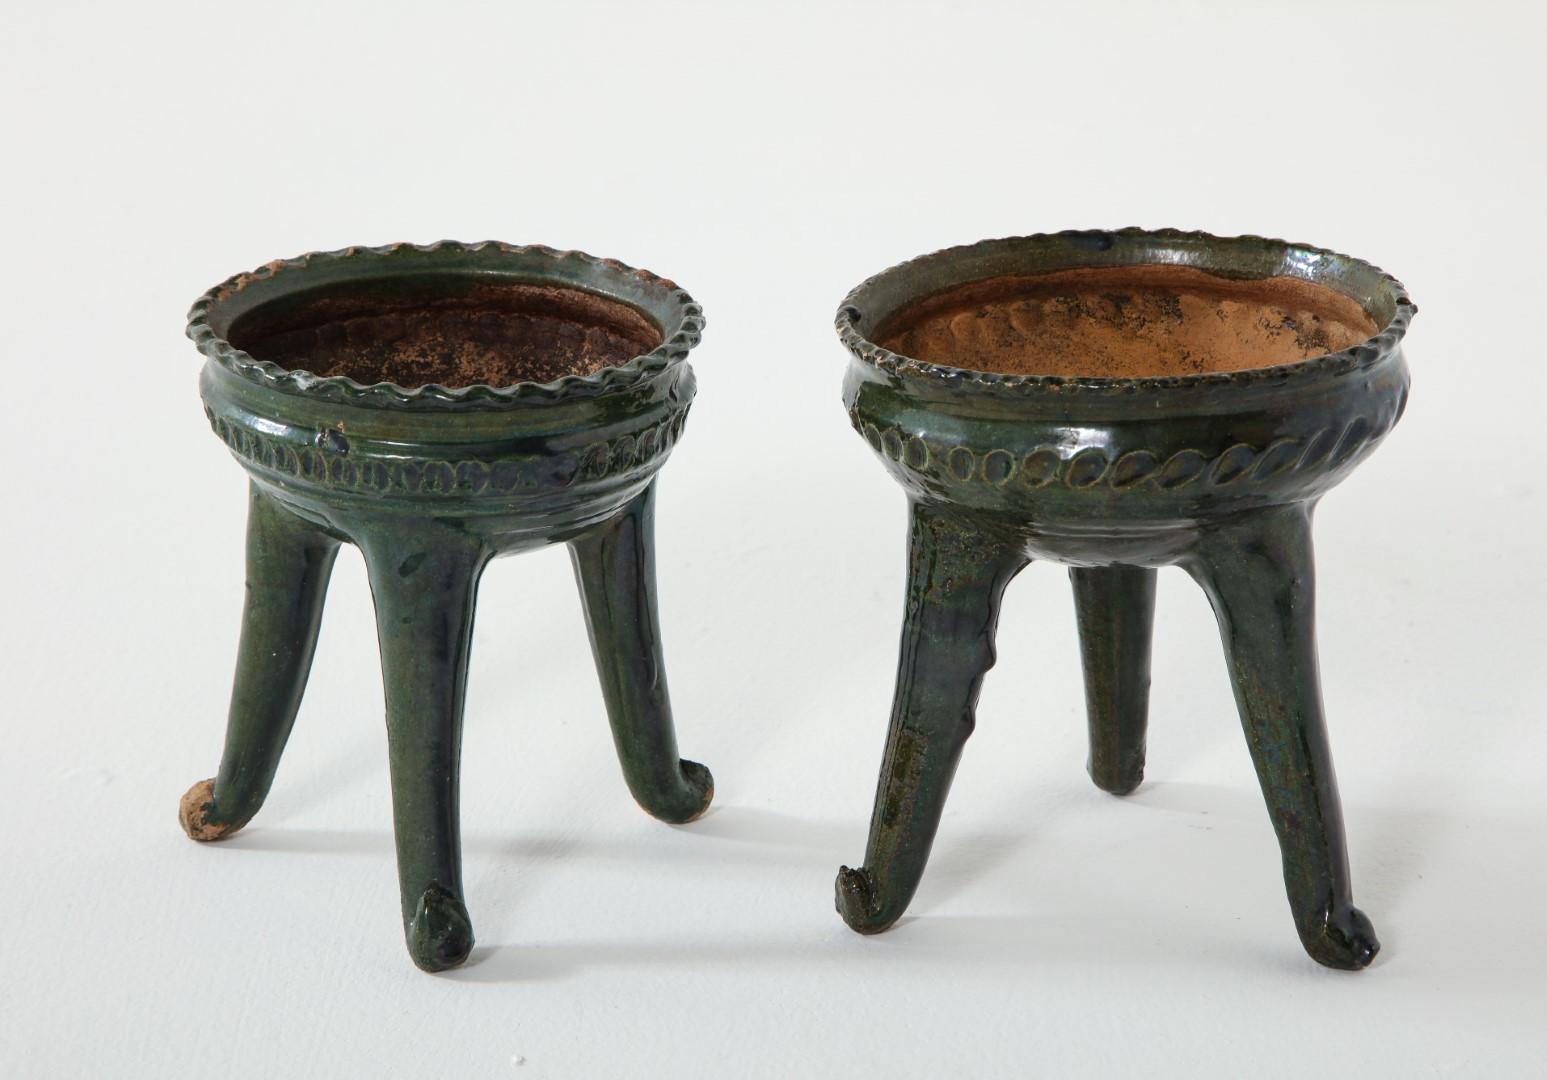 A pair of vintage green-glazed pottery footed bowls, from Morelia, Mexico. 1960s. Sweet as small planters. 

Slight size variations: 
Smaller 6.25